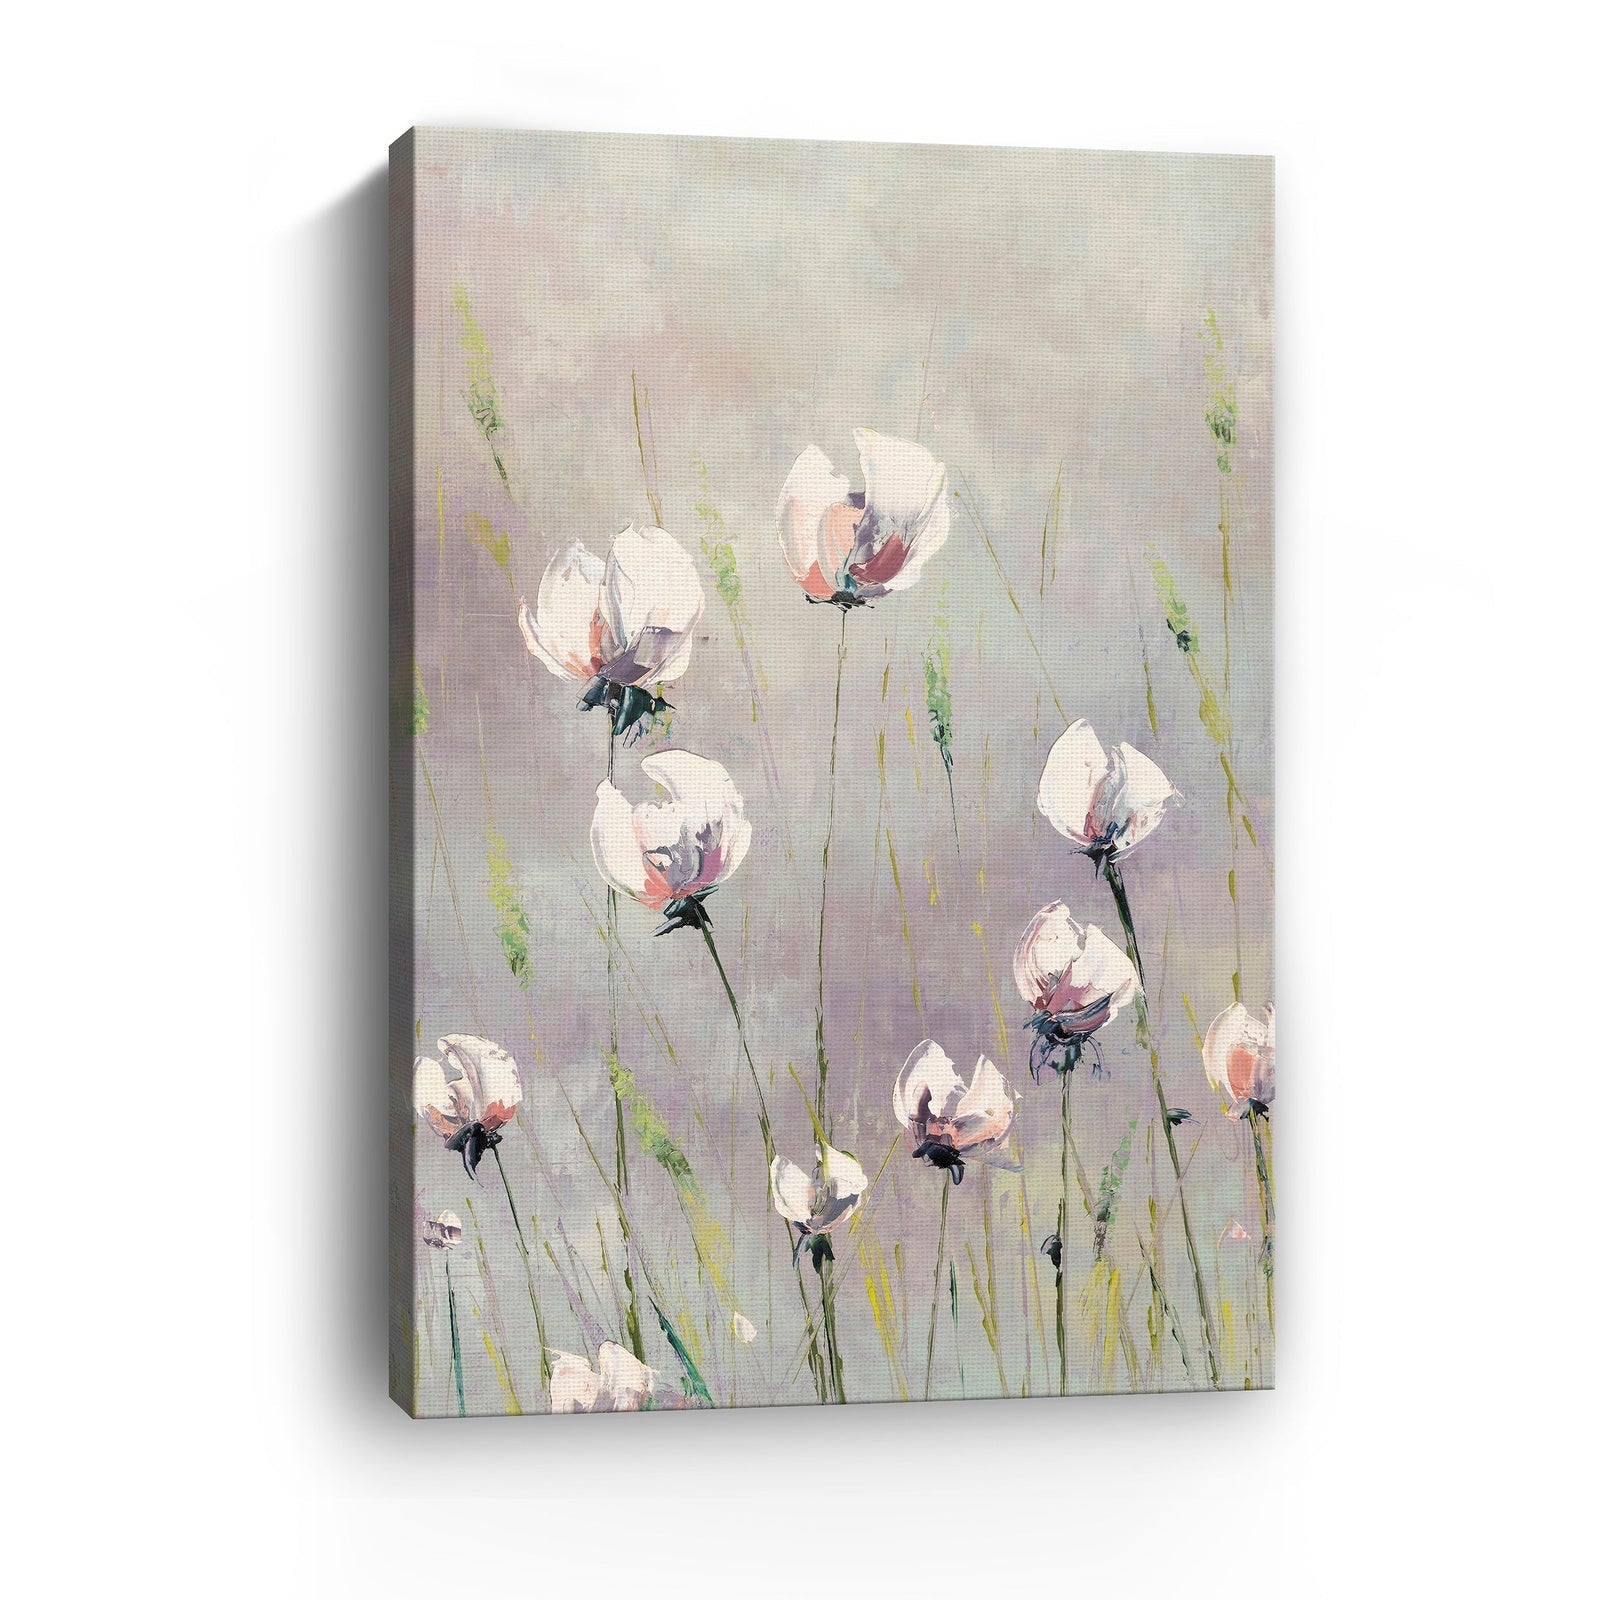 White Tulips Canvas Giclee - Wall Art